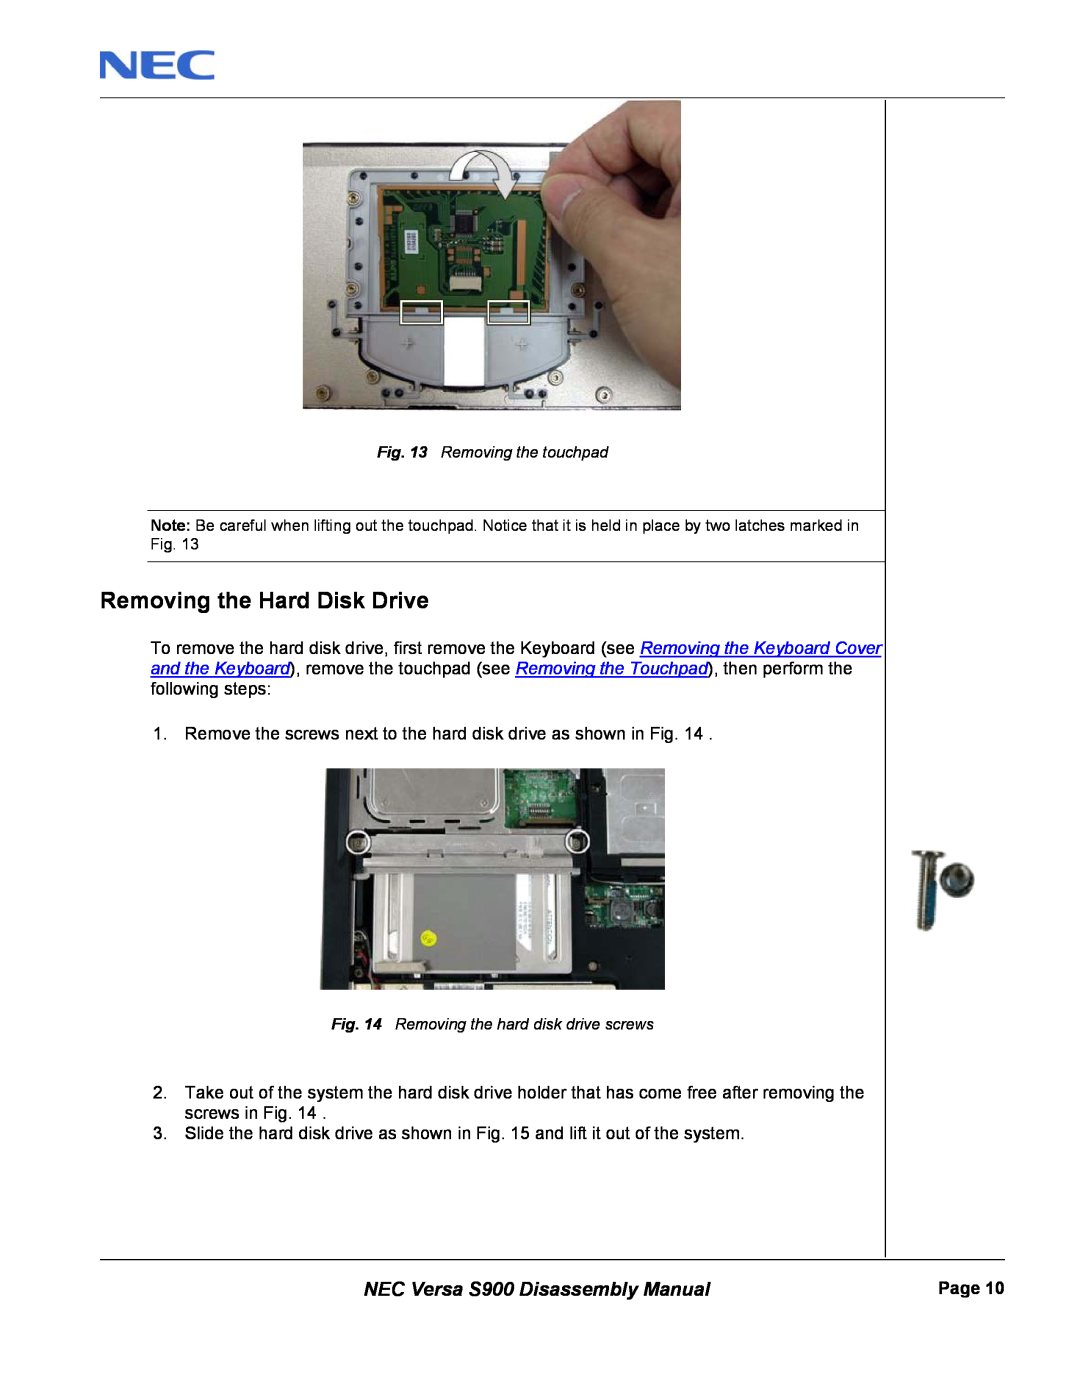 NEC manual Removing the Hard Disk Drive, NEC Versa S900 Disassembly Manual, Removing the touchpad 